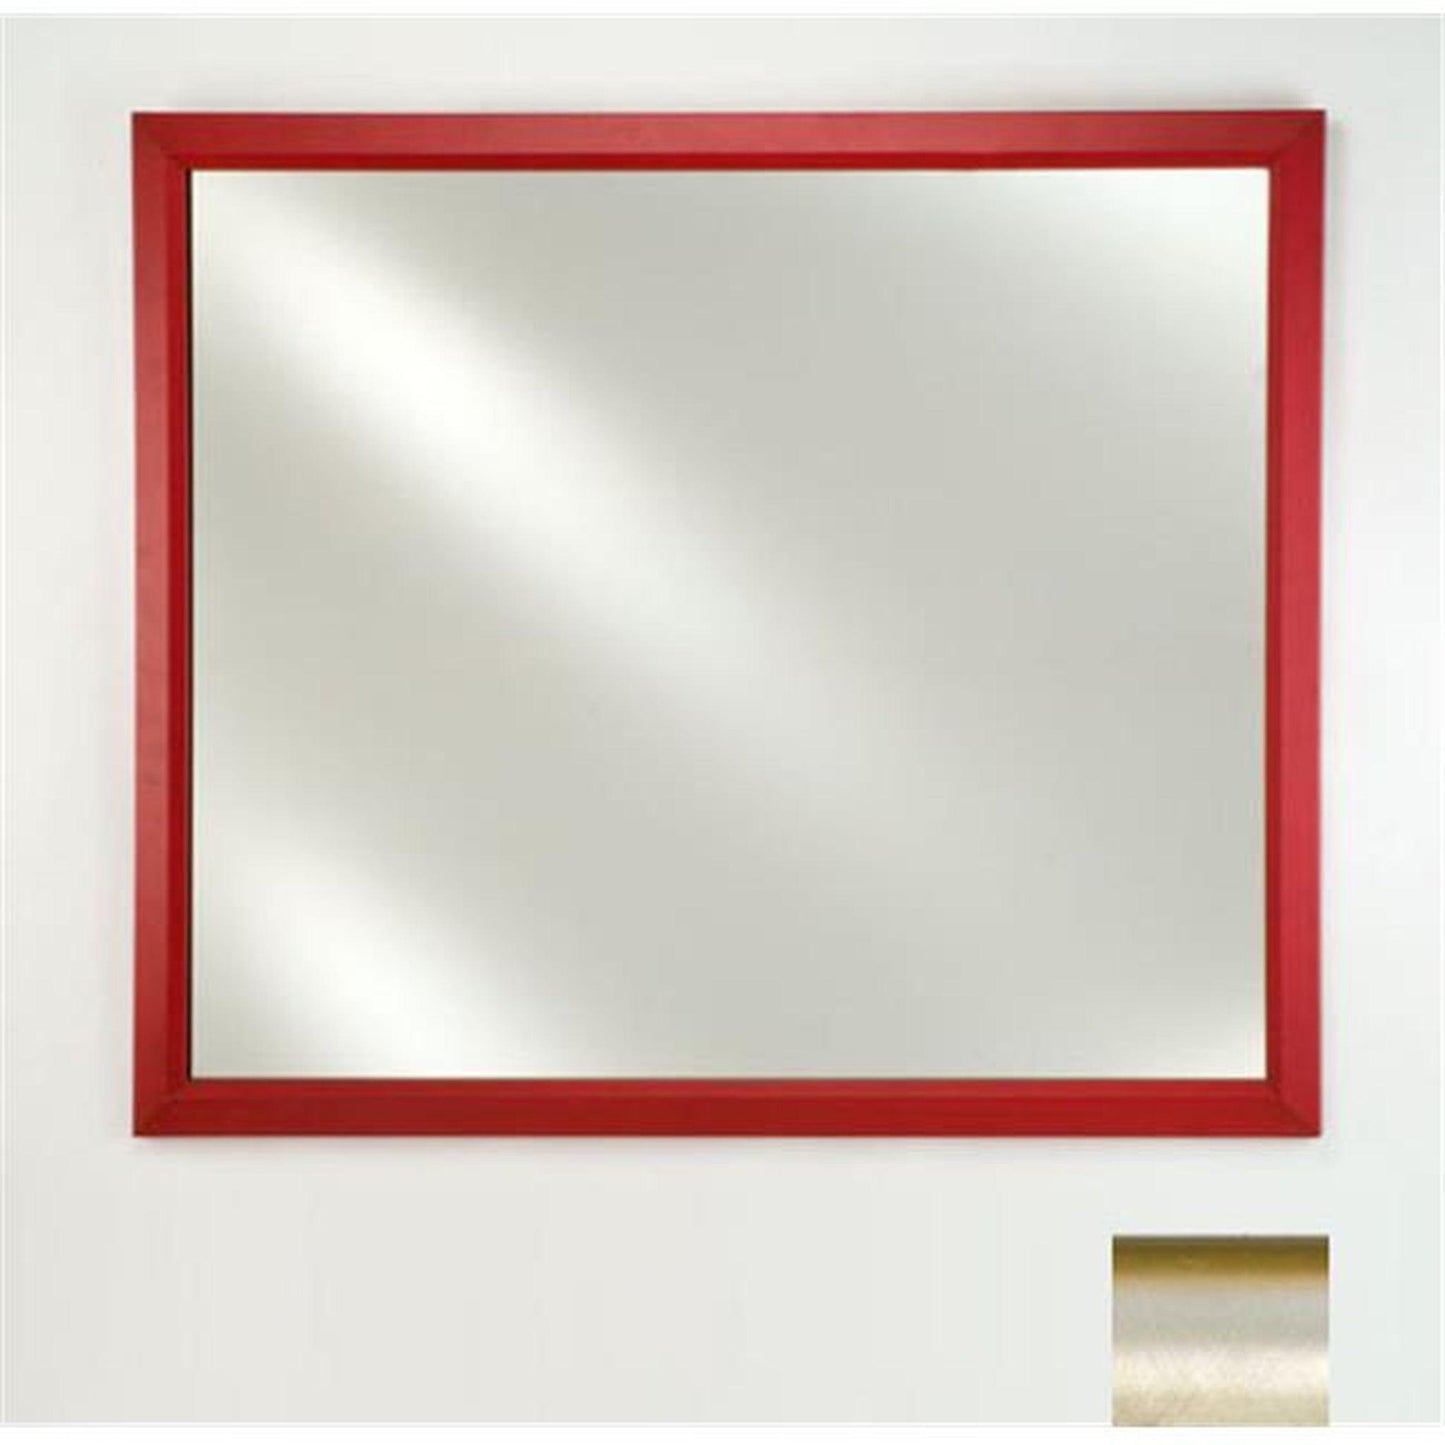 Afina Signature 16" x 22" Brushed Satin Silver Framed Mirror With Plain Edge